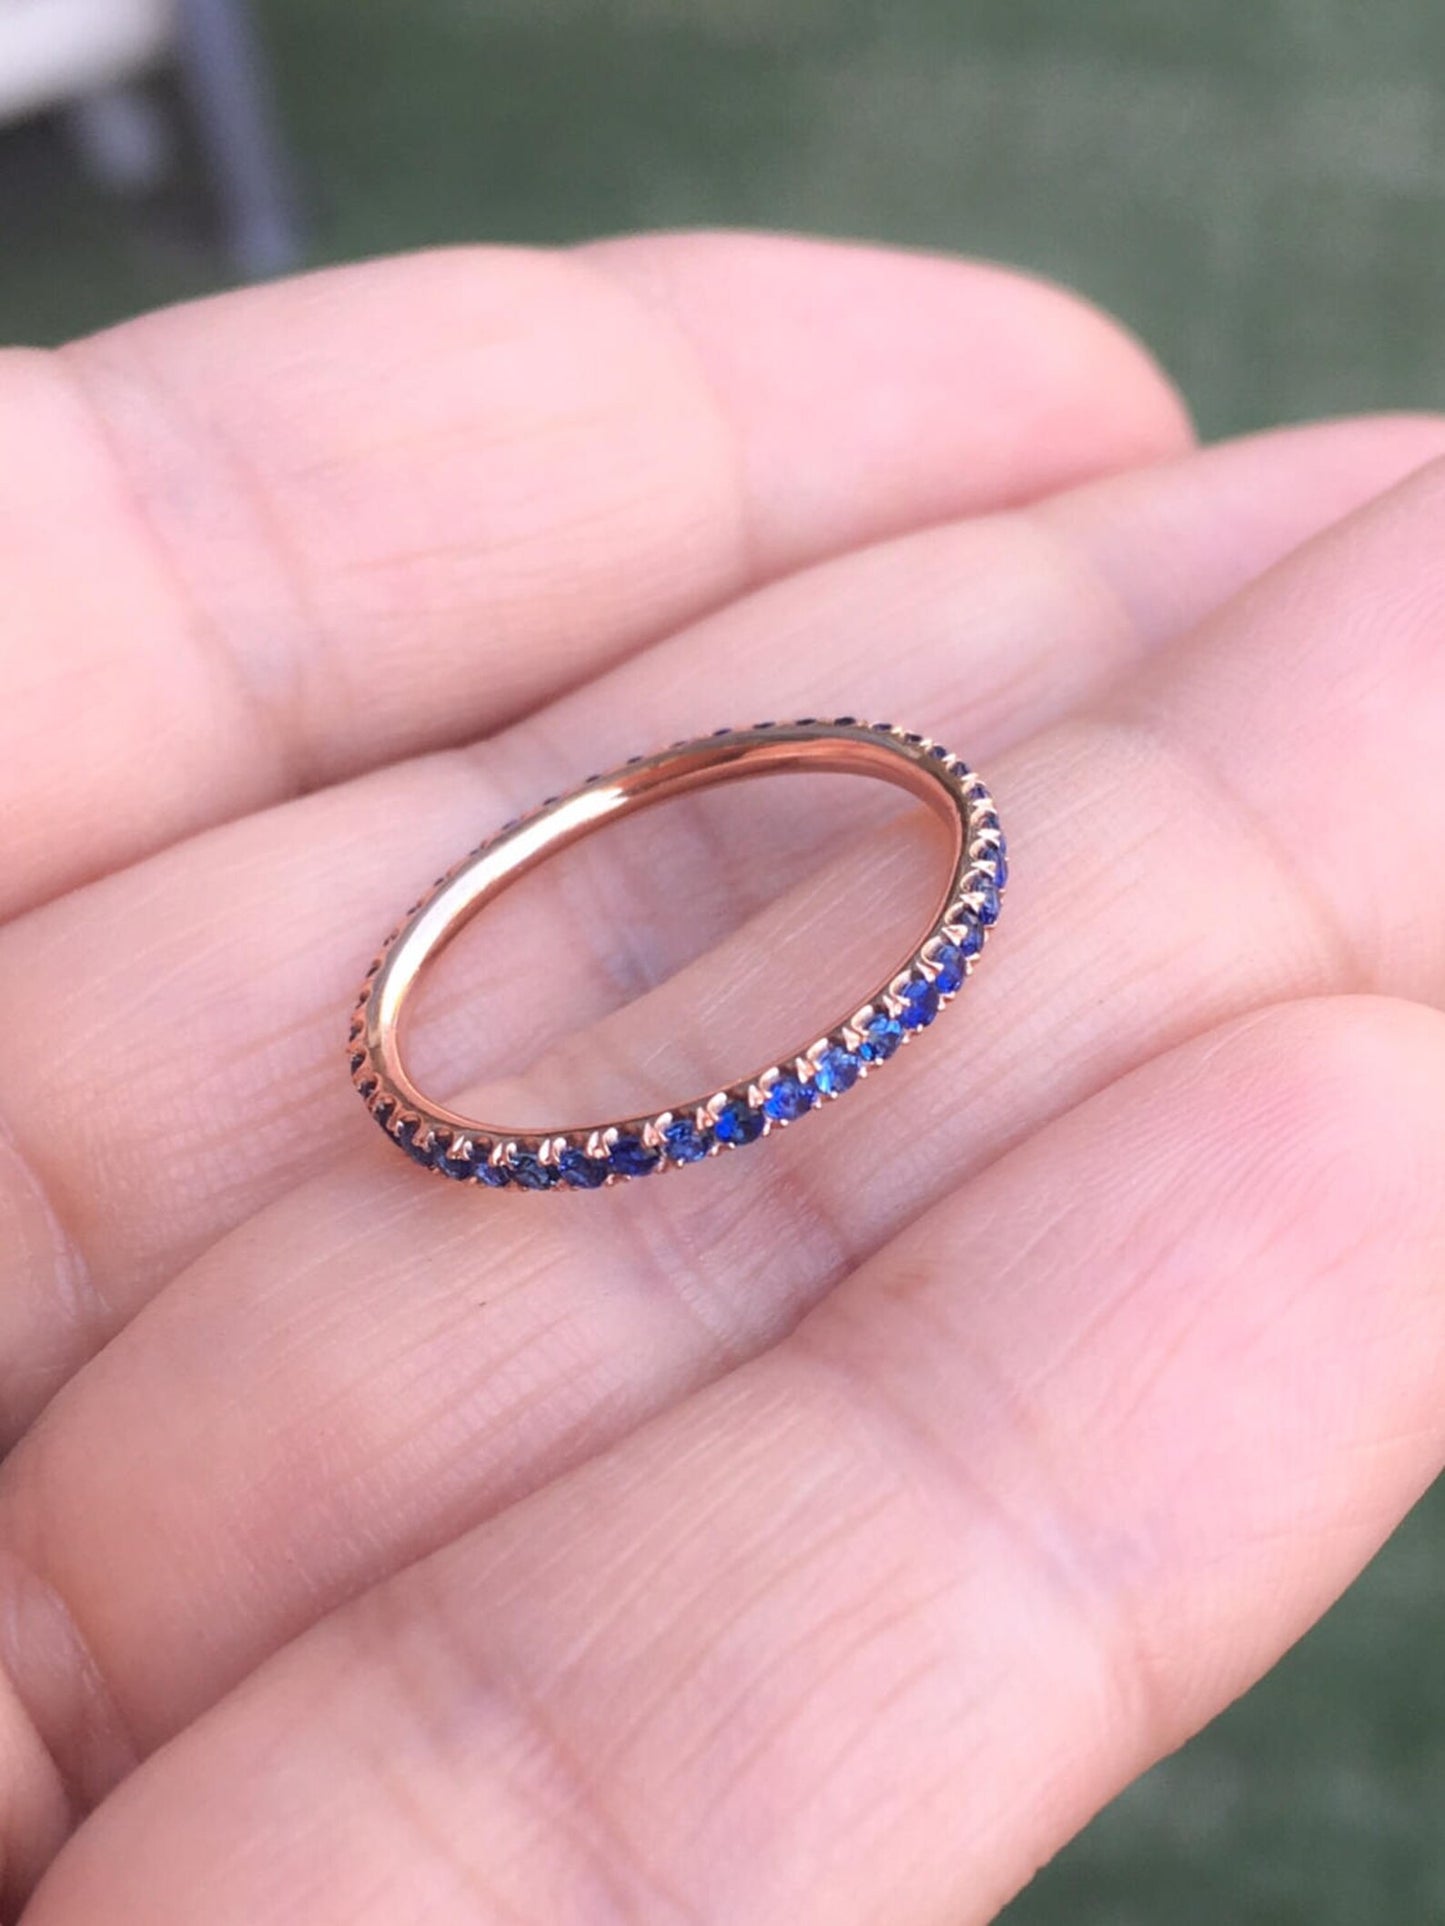 Blue Sapphire Pave Band/ 1.5mm Full Eternity Ring/ Blue Sapphire Wedding Anniversary Ring/ Sapphire Stacking Guard Ring/ September Infinity Ring/ Gold or Platinum